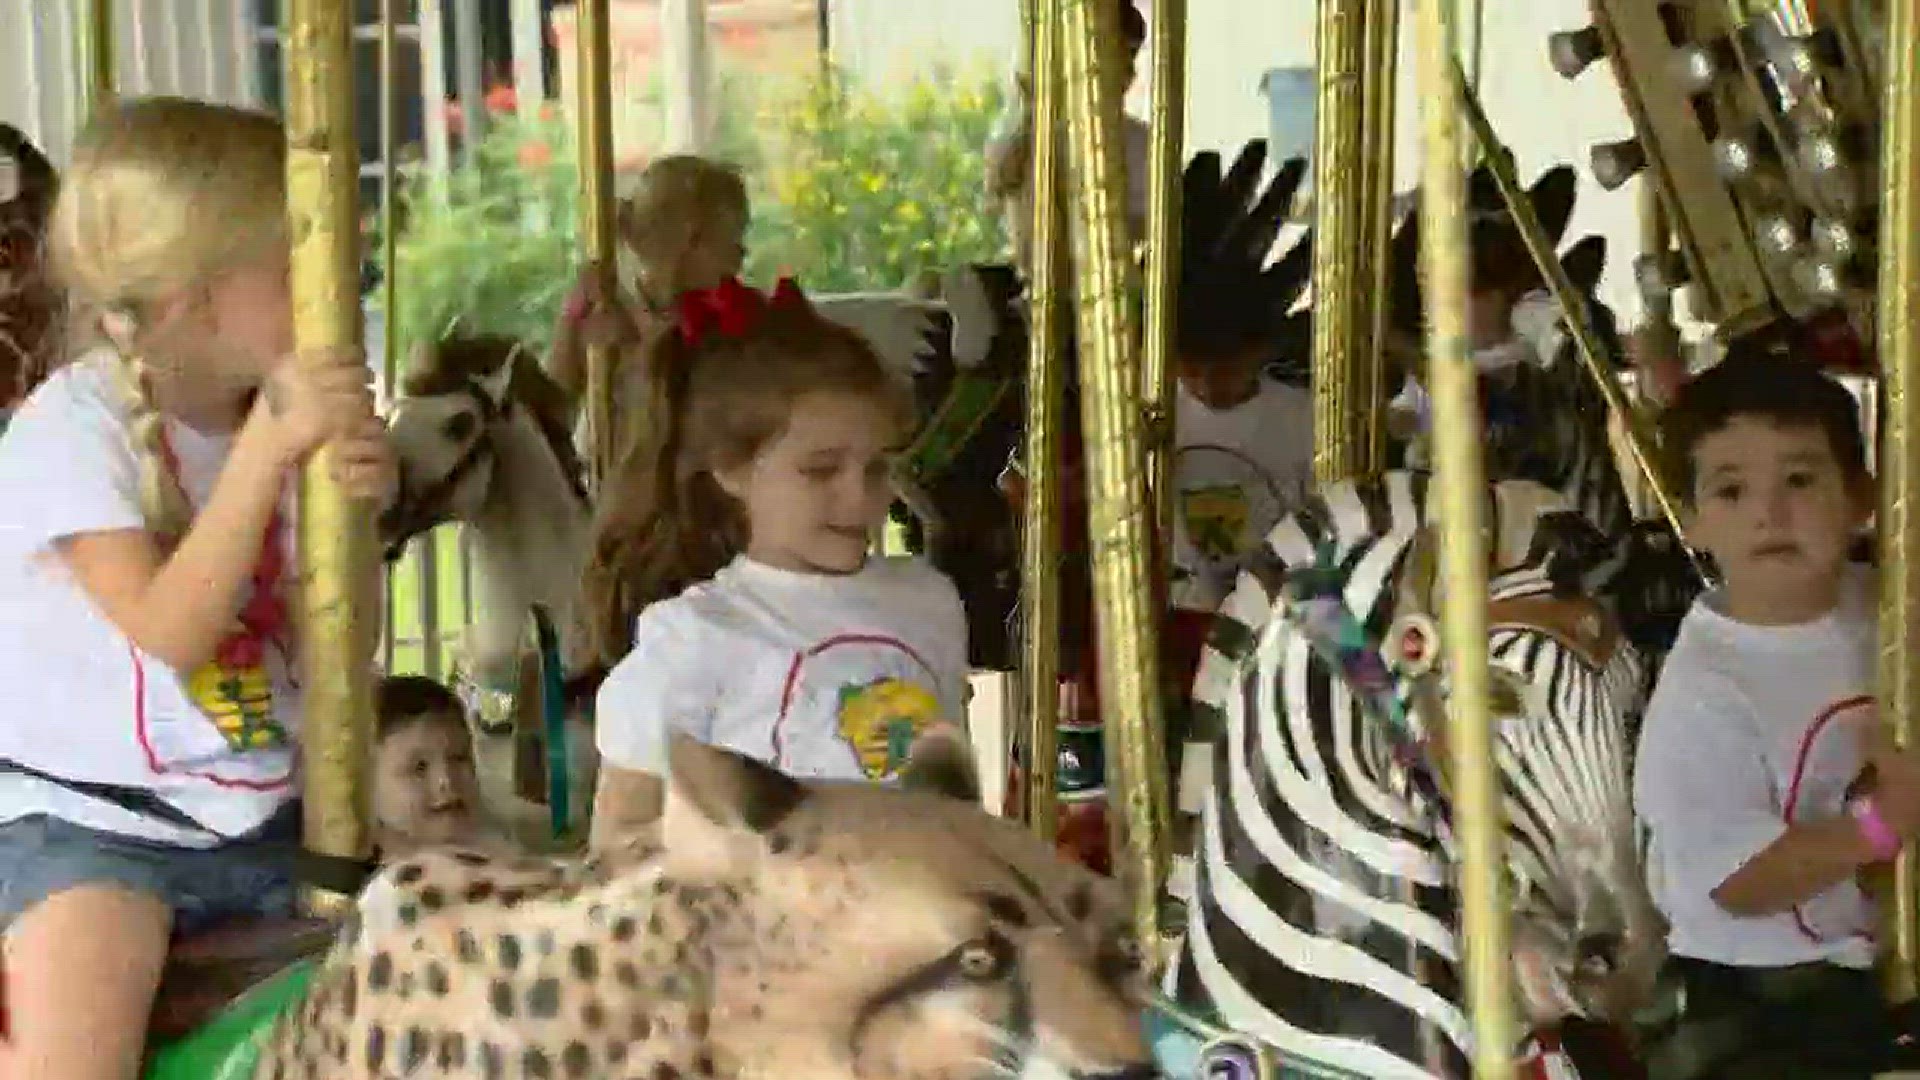 The theme park made accessible to all abilities is now becoming a classroom to students during field trips.